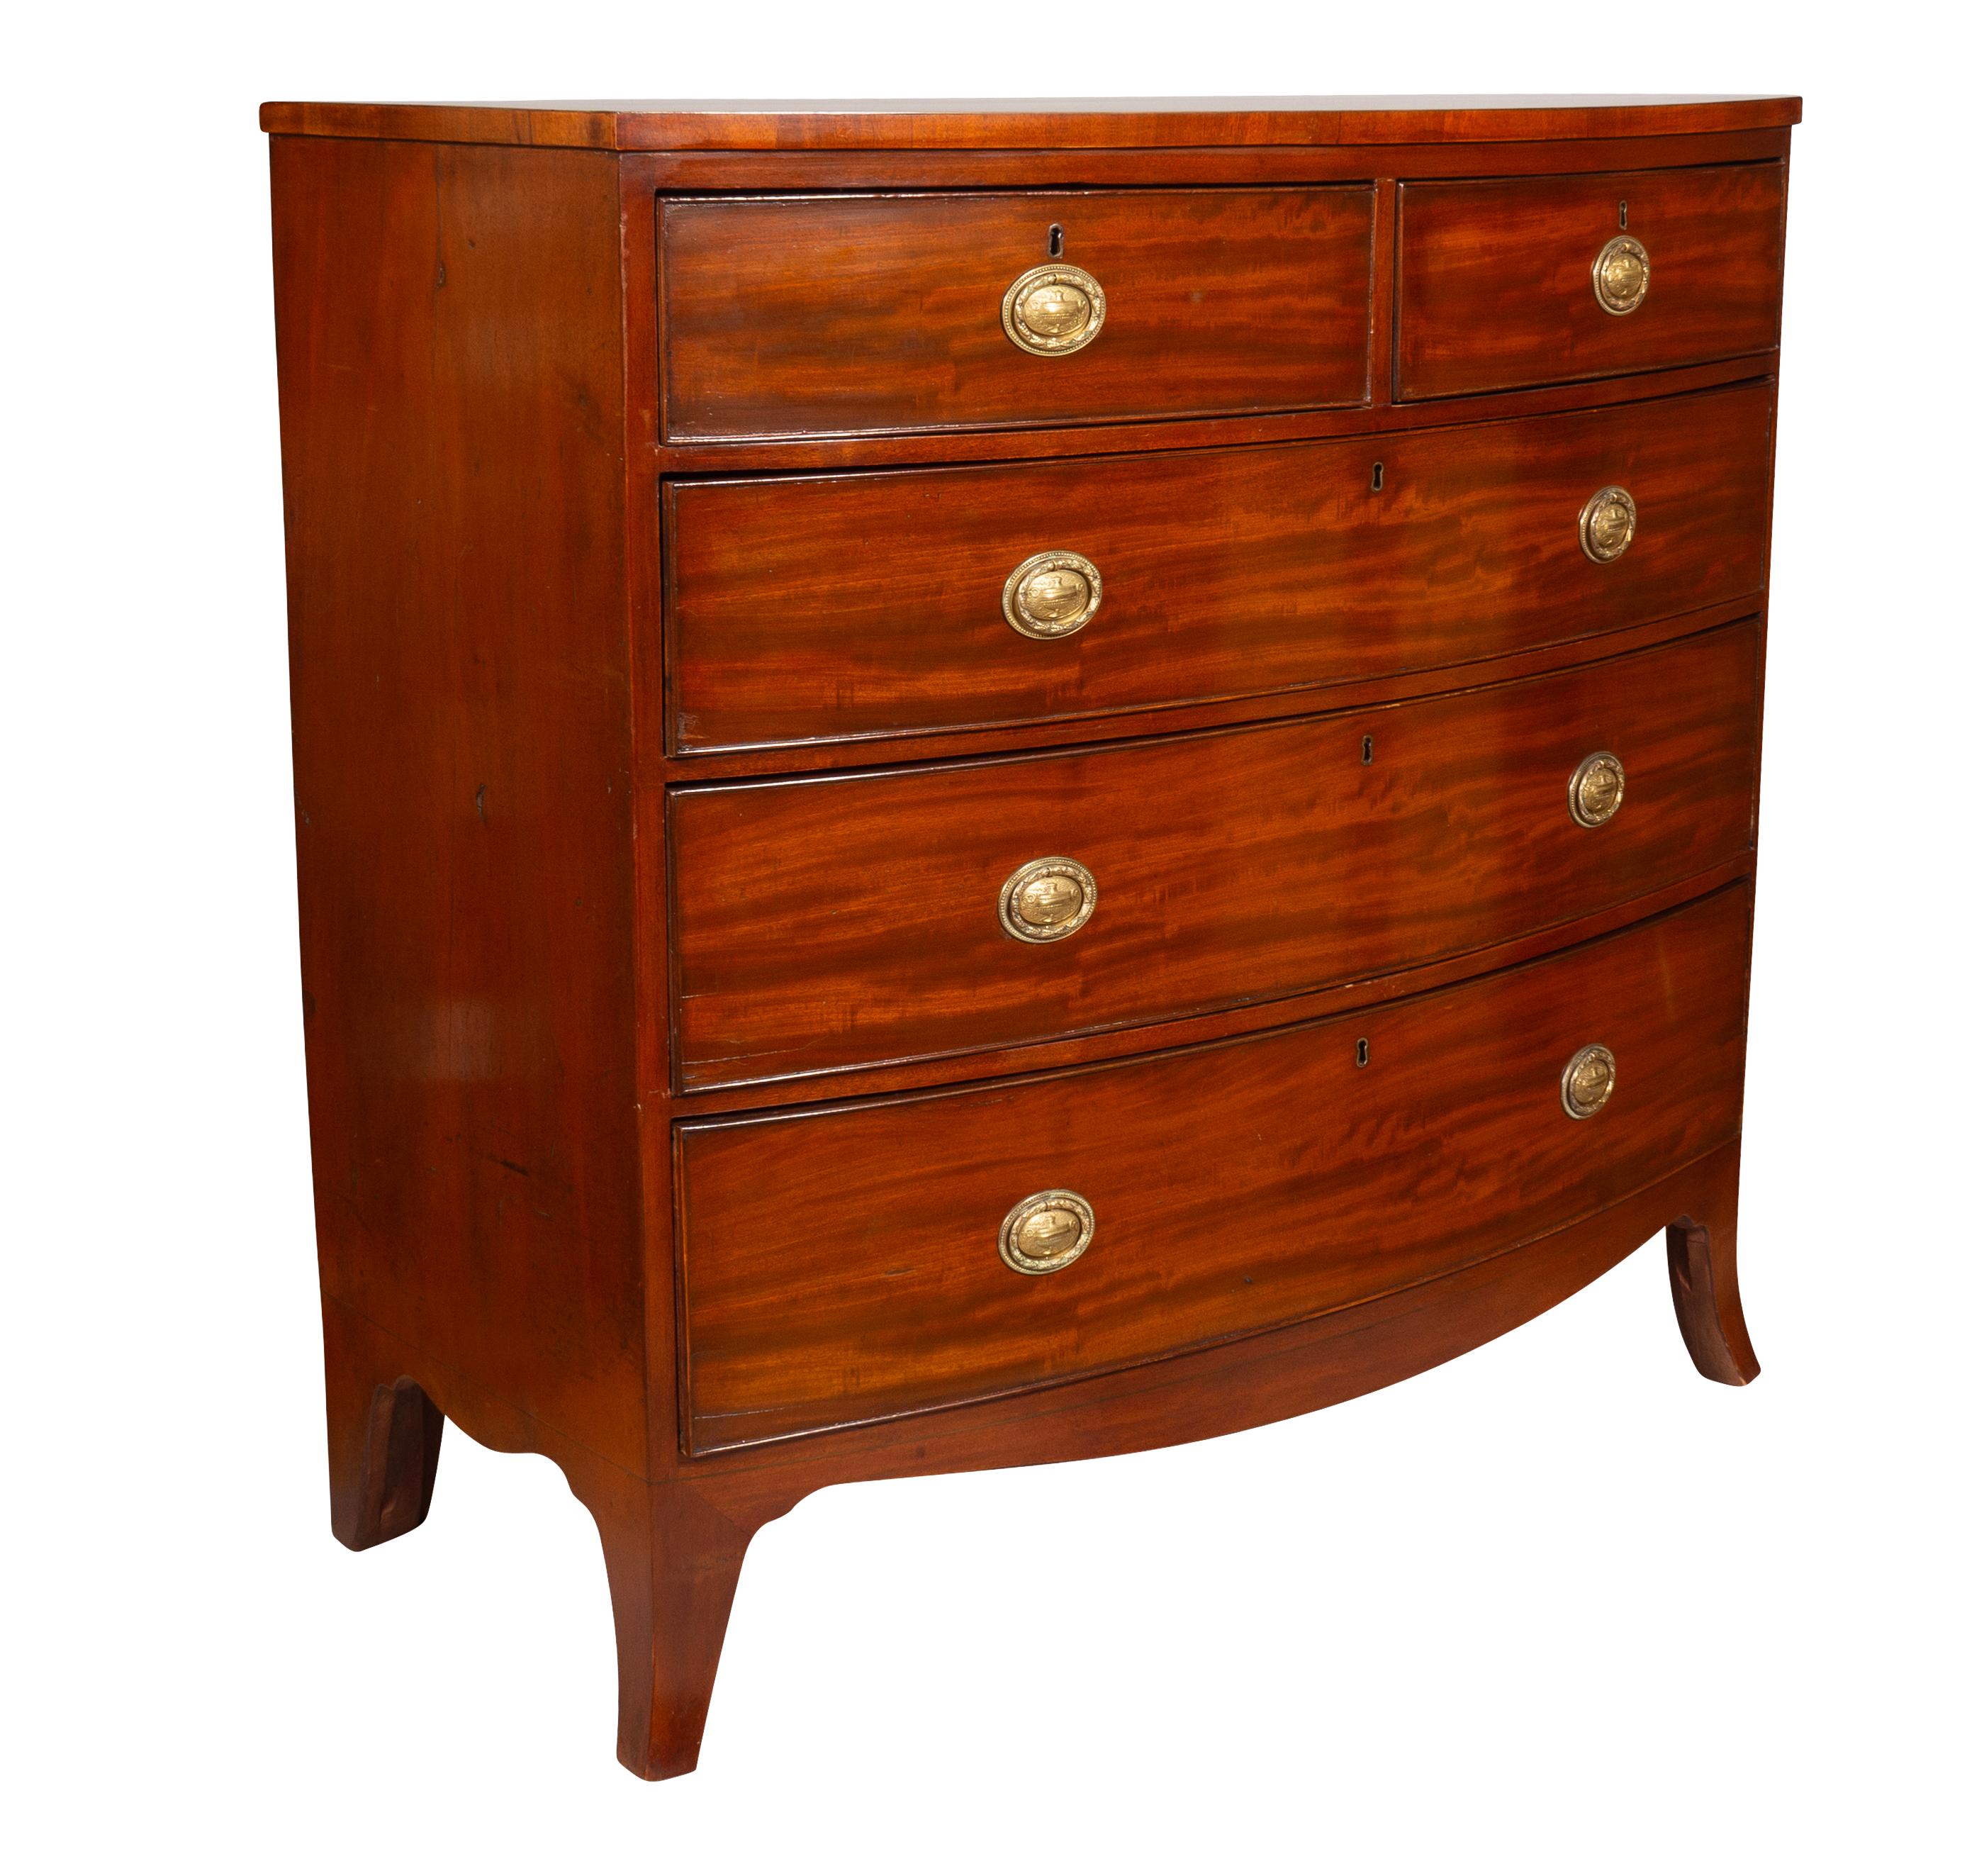 Rectangular bow front top with two over three drawers with oval brass handles. Splayed legs.